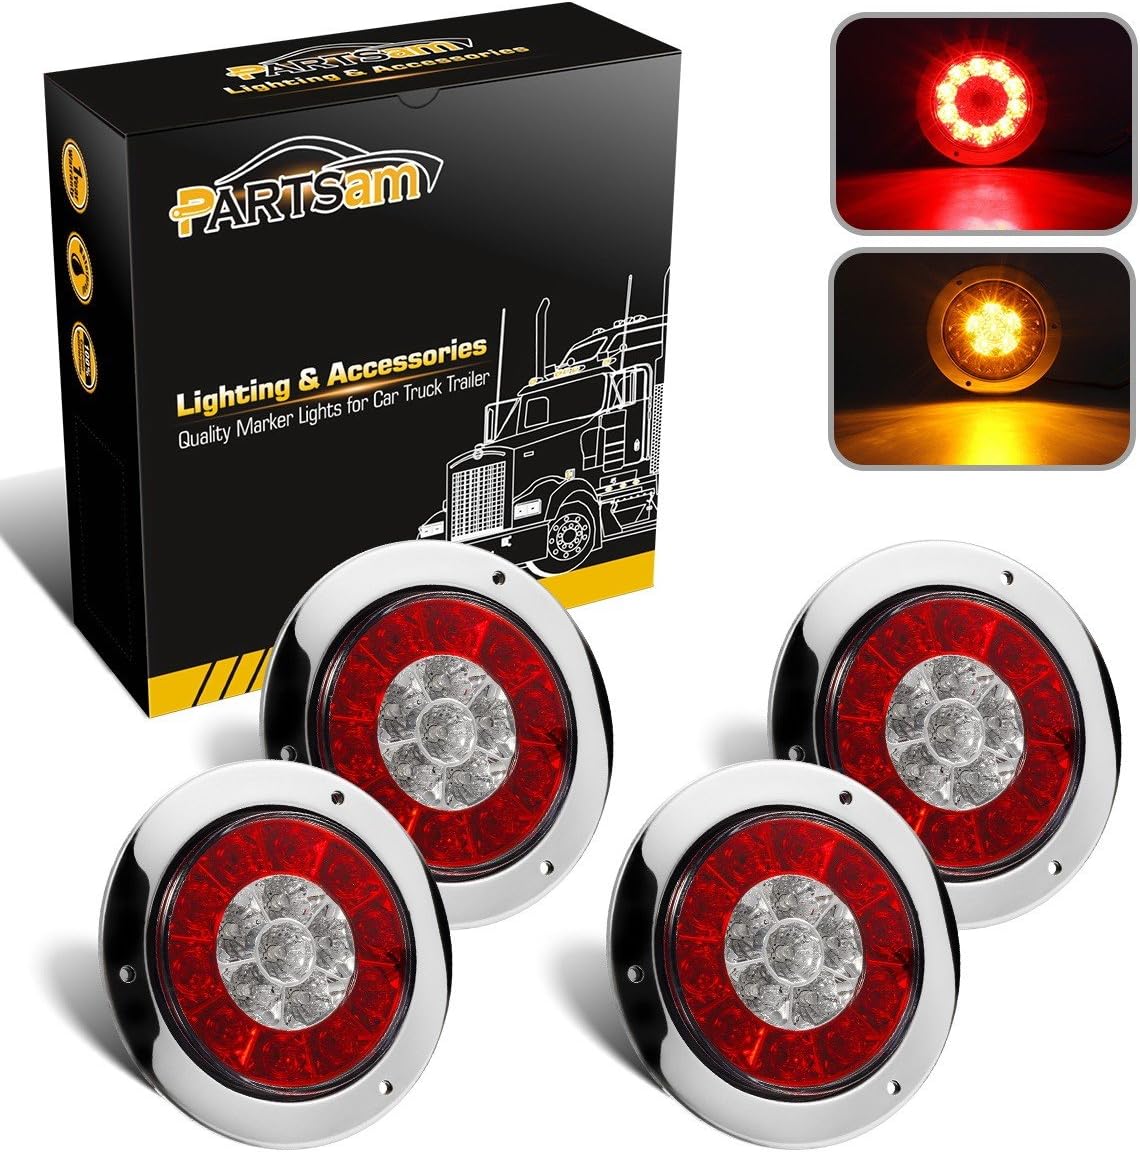 Partsam 4" Inch Round Led Trailer Taillights Stop Brake Lights Running Red and Amber Parking and Turn Signal Lights, Sealed Double Color Round Led Lights w/Stainless Steel Rings Flange Mount (4Pack)